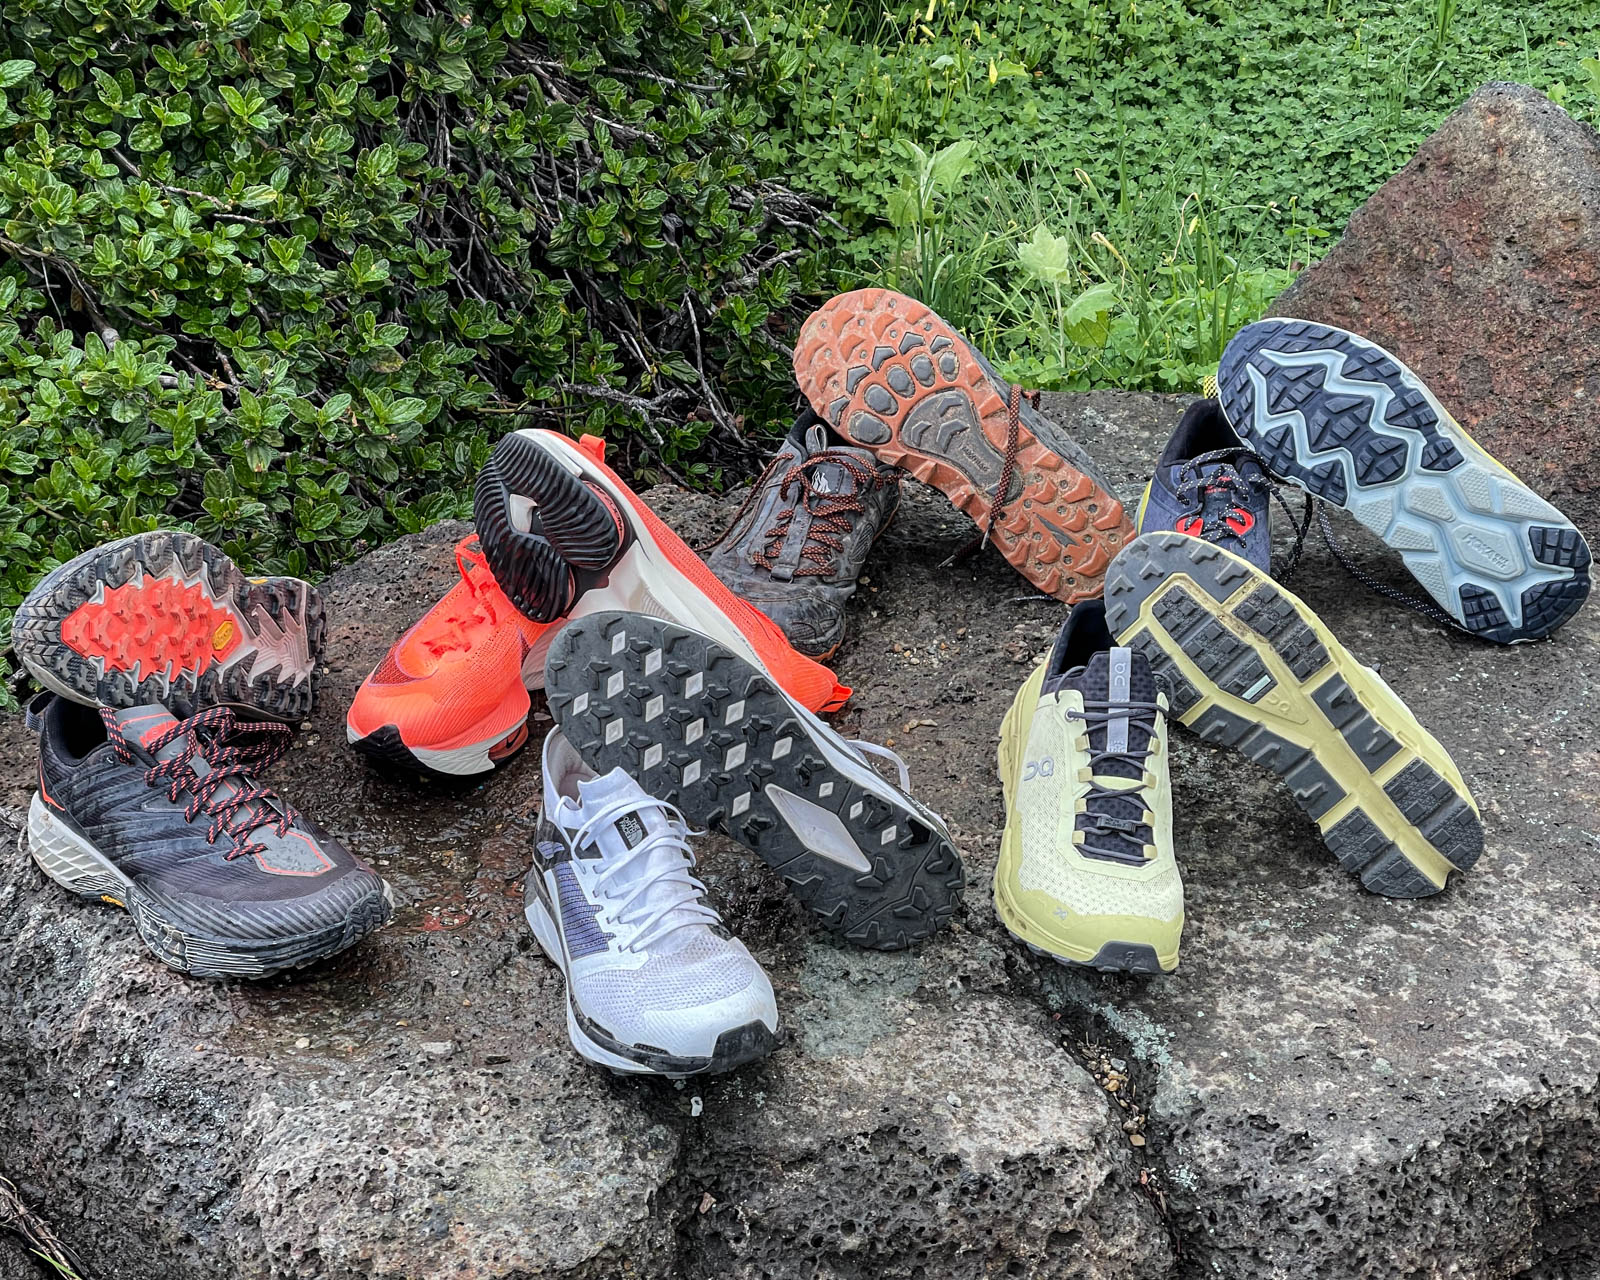 How to Choose Hiking Shoes | Picking Hiking Shoes That Work For You